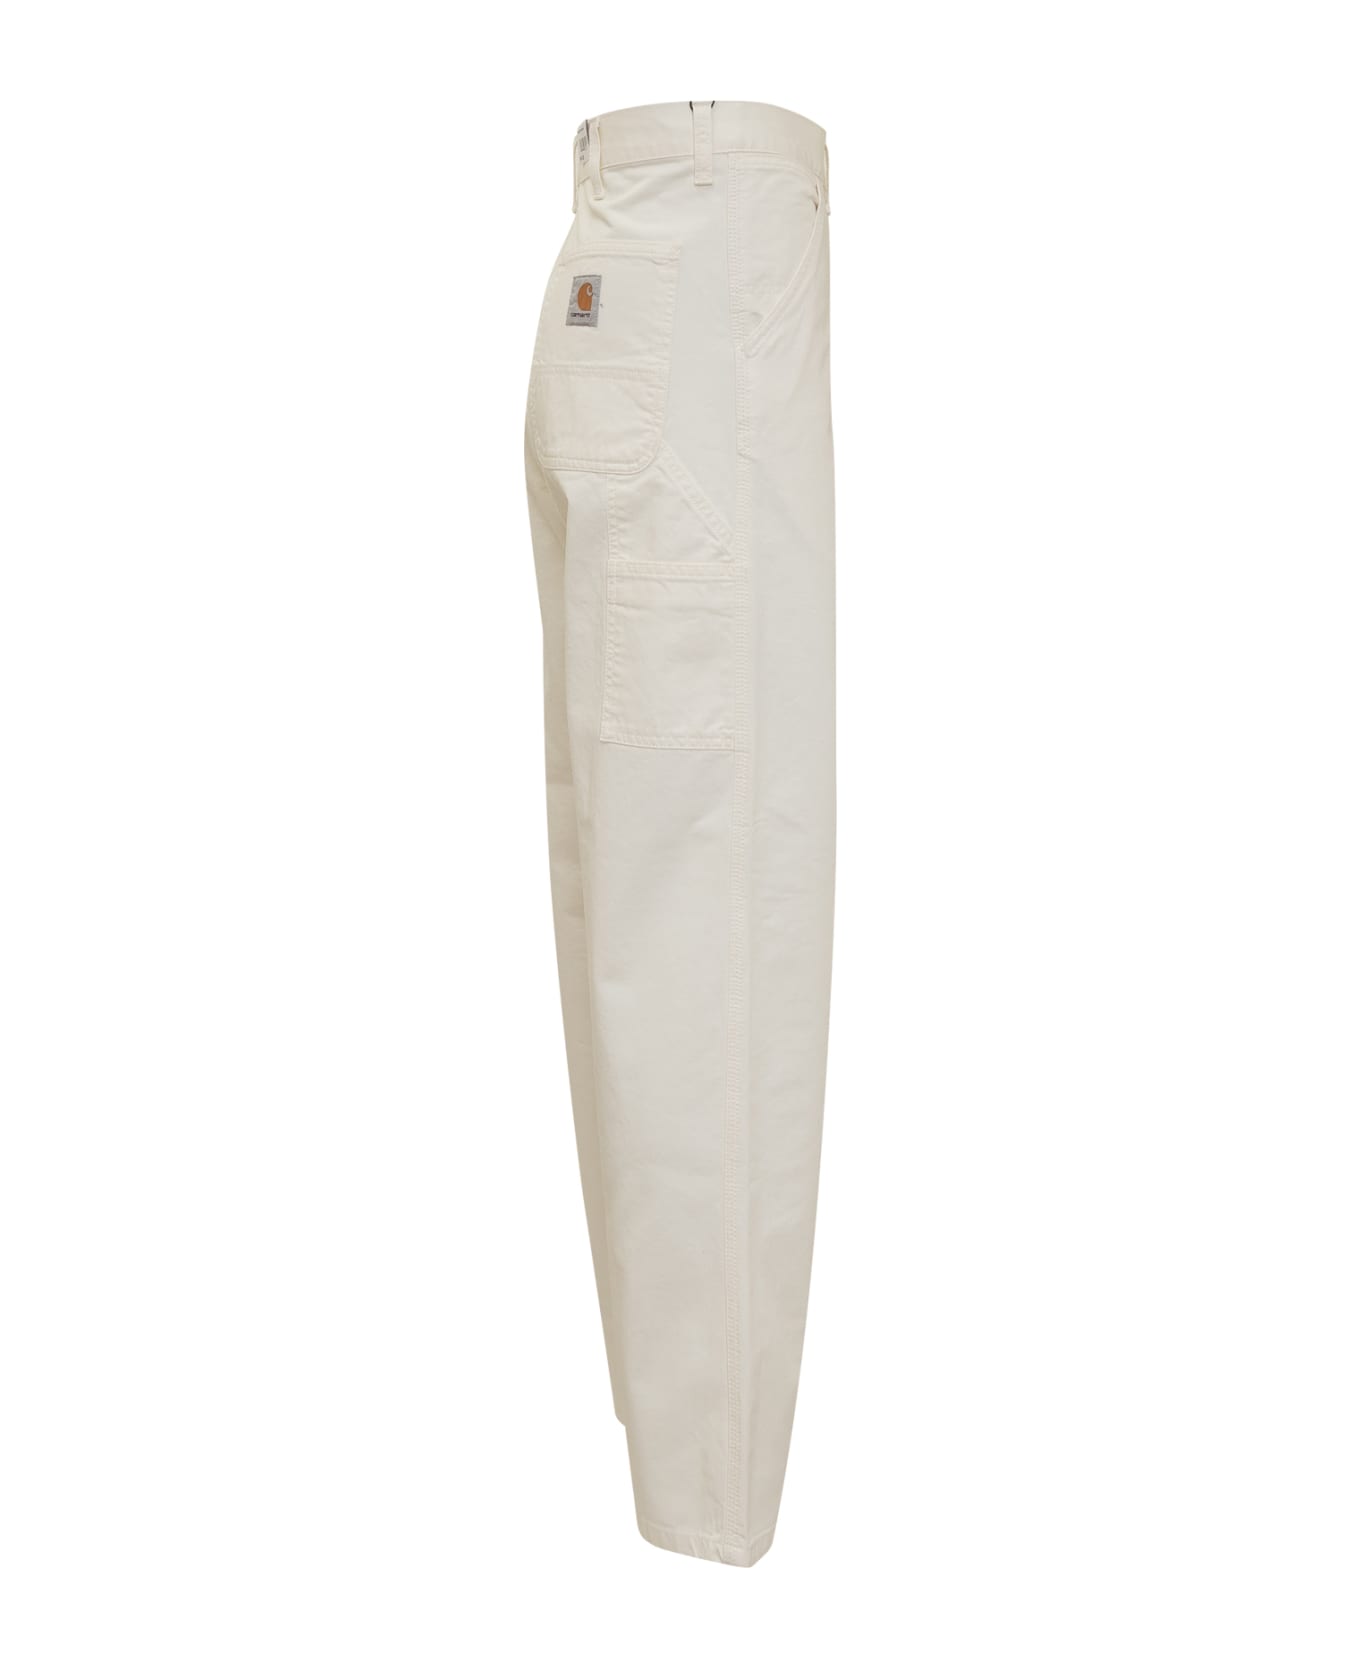 Carhartt Trousers - Off White Rinsed ボトムス